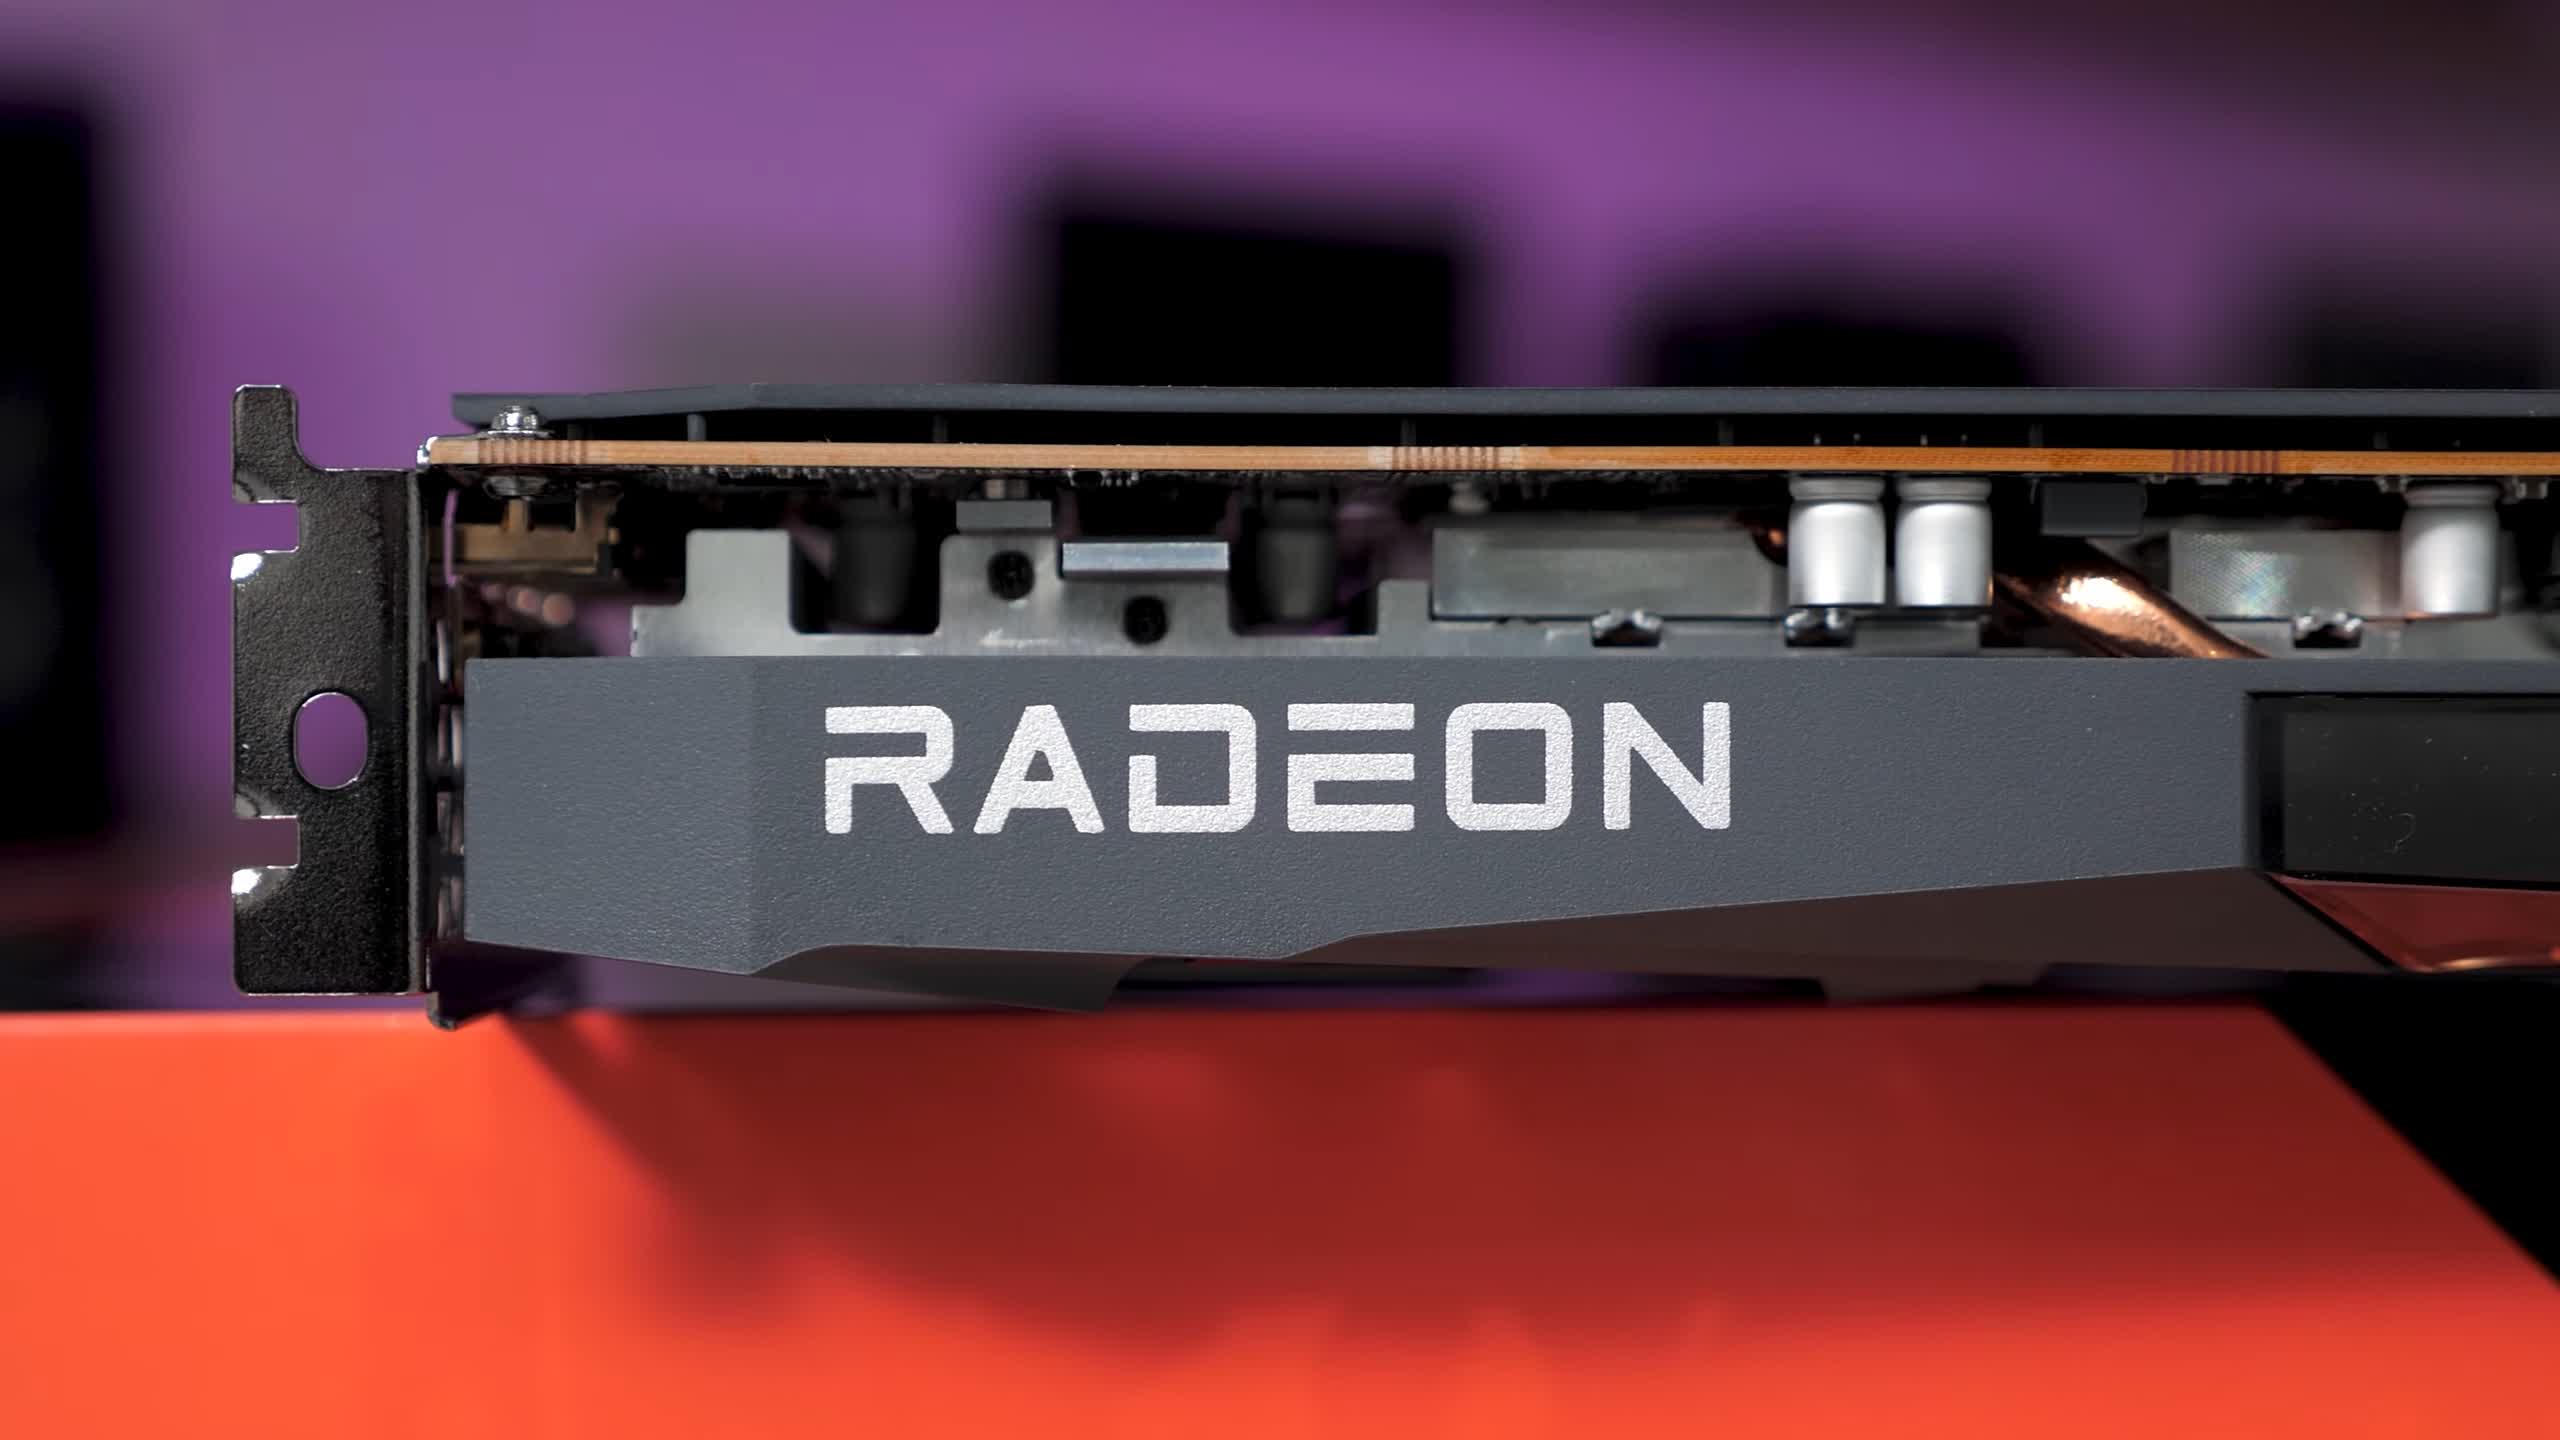 AMD said to be prepping Radeon Super Resolution, an FSR alternative for nearly all games